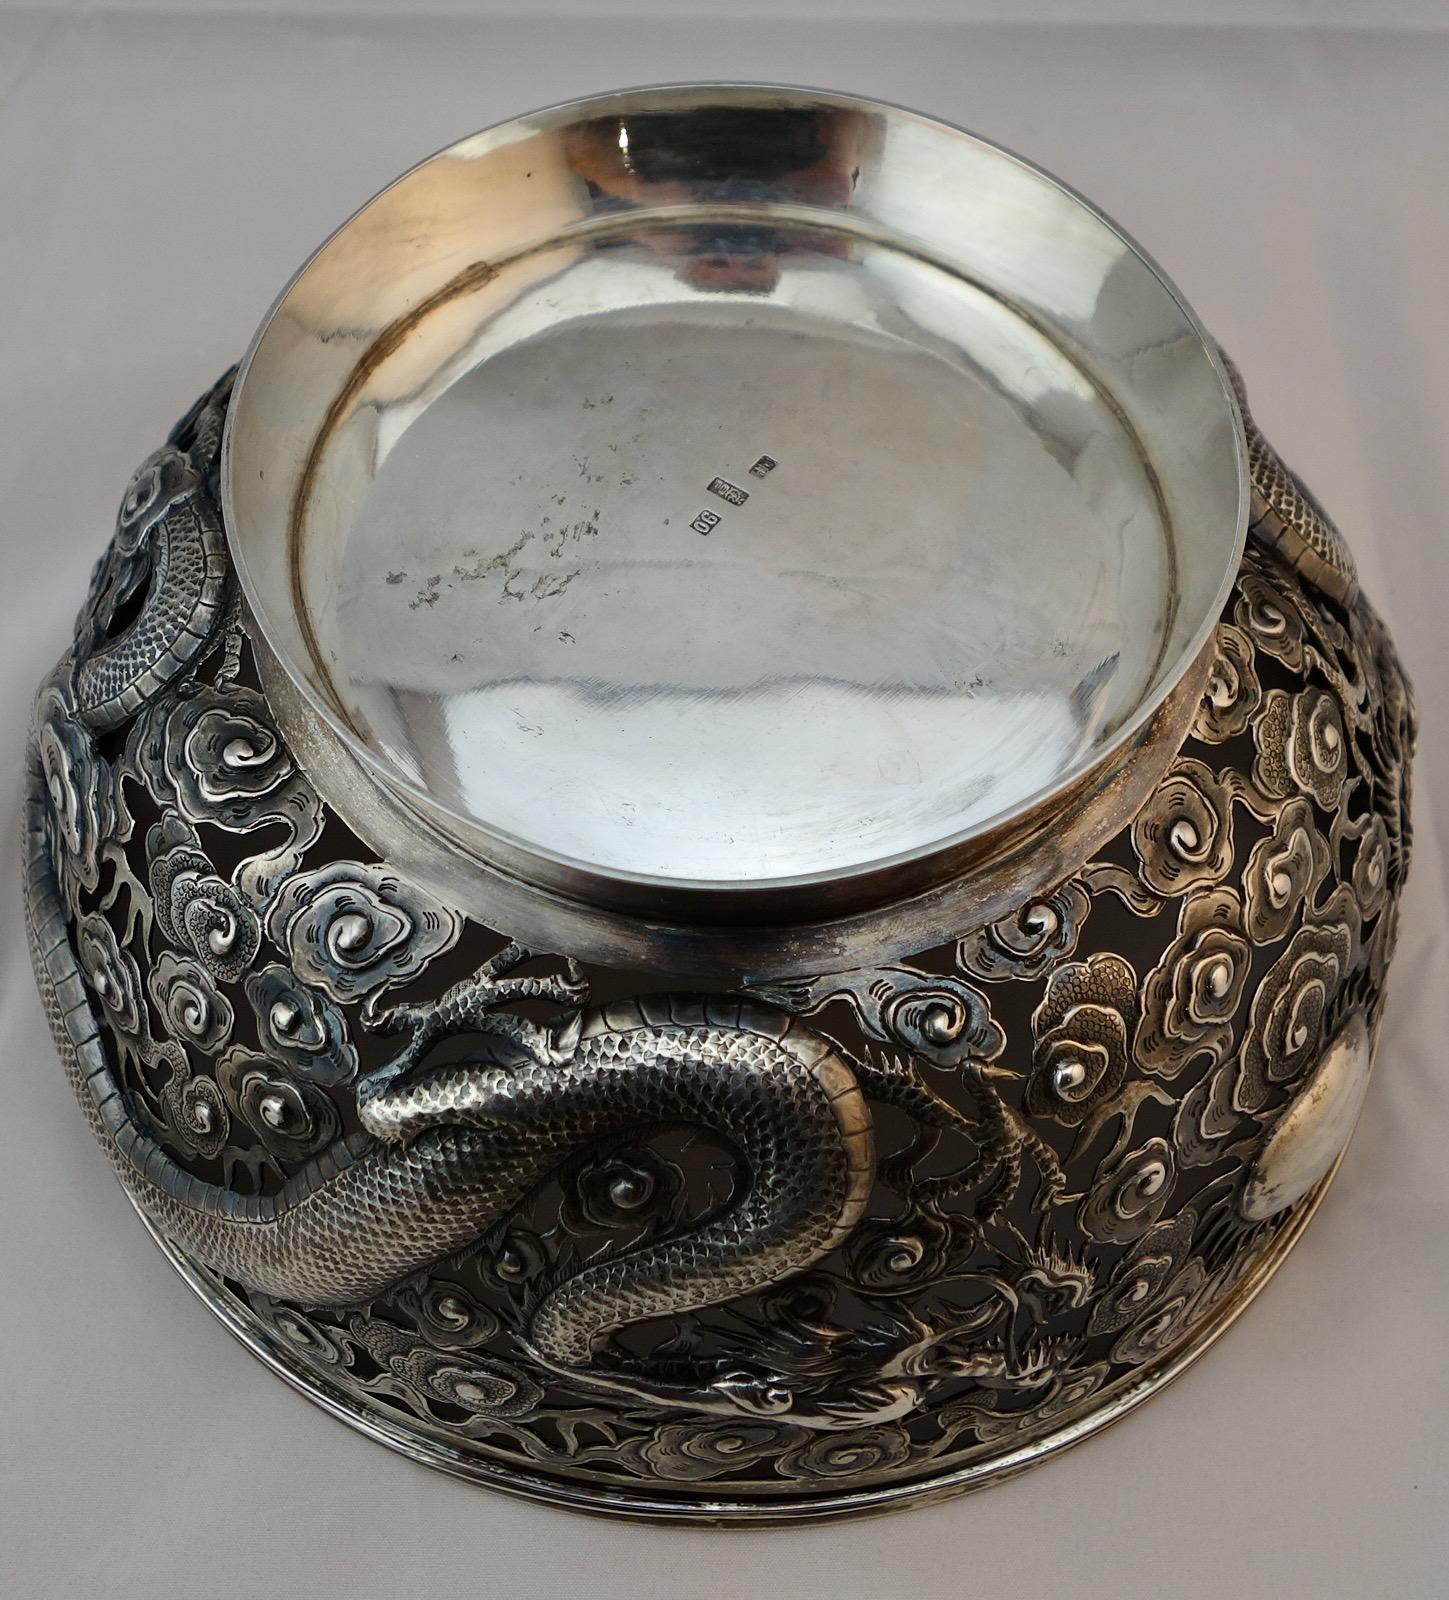 19th Century Chinese Export Silver Openwork Dragon Bowl by Wang Hing & Co, Hong Kong, 1890 For Sale